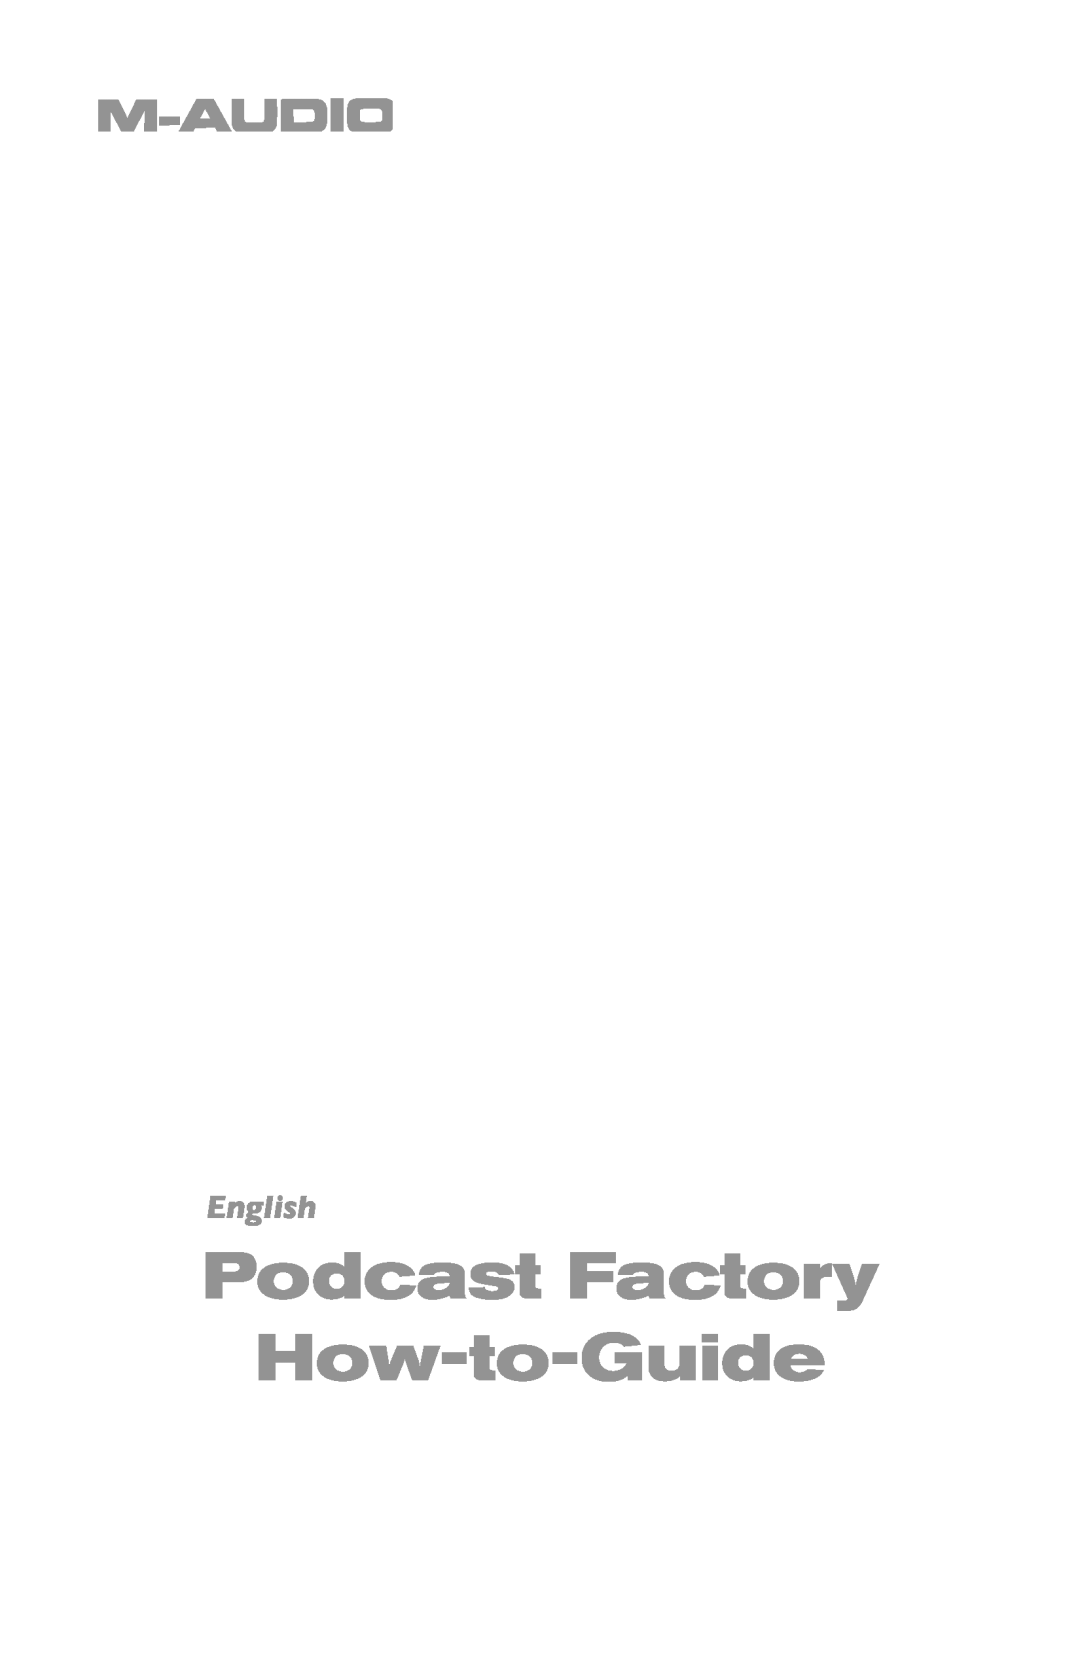 M-Audio 120 MX, 144 MX, 100 MX manual Podcast Factory How-to-Guide 